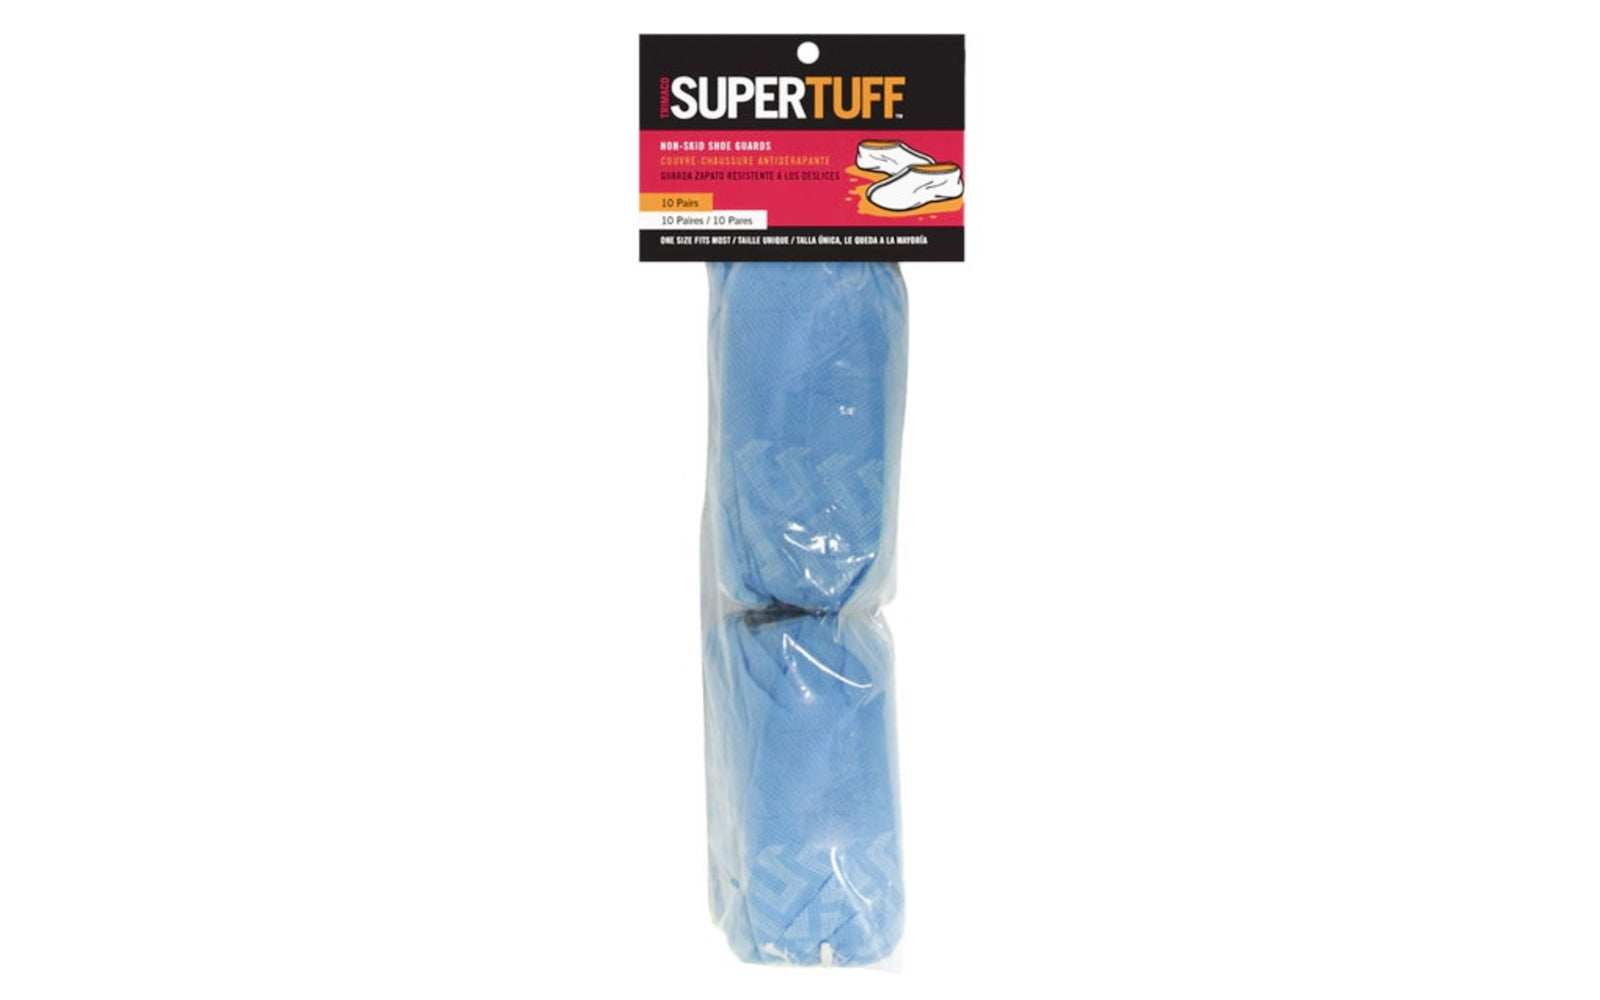 Non-Skid Blue Polypropylene Shoe Guards. Sold as 10 pairs in pack. Elastic ankle slips on easily over all shoes & stays on snugly. For protecting shoes from paint & debris, or protecting flooring from tracking in dirt. Use shoe coverings for painting, sanding, general construction work, open houses & more. Model 54310.